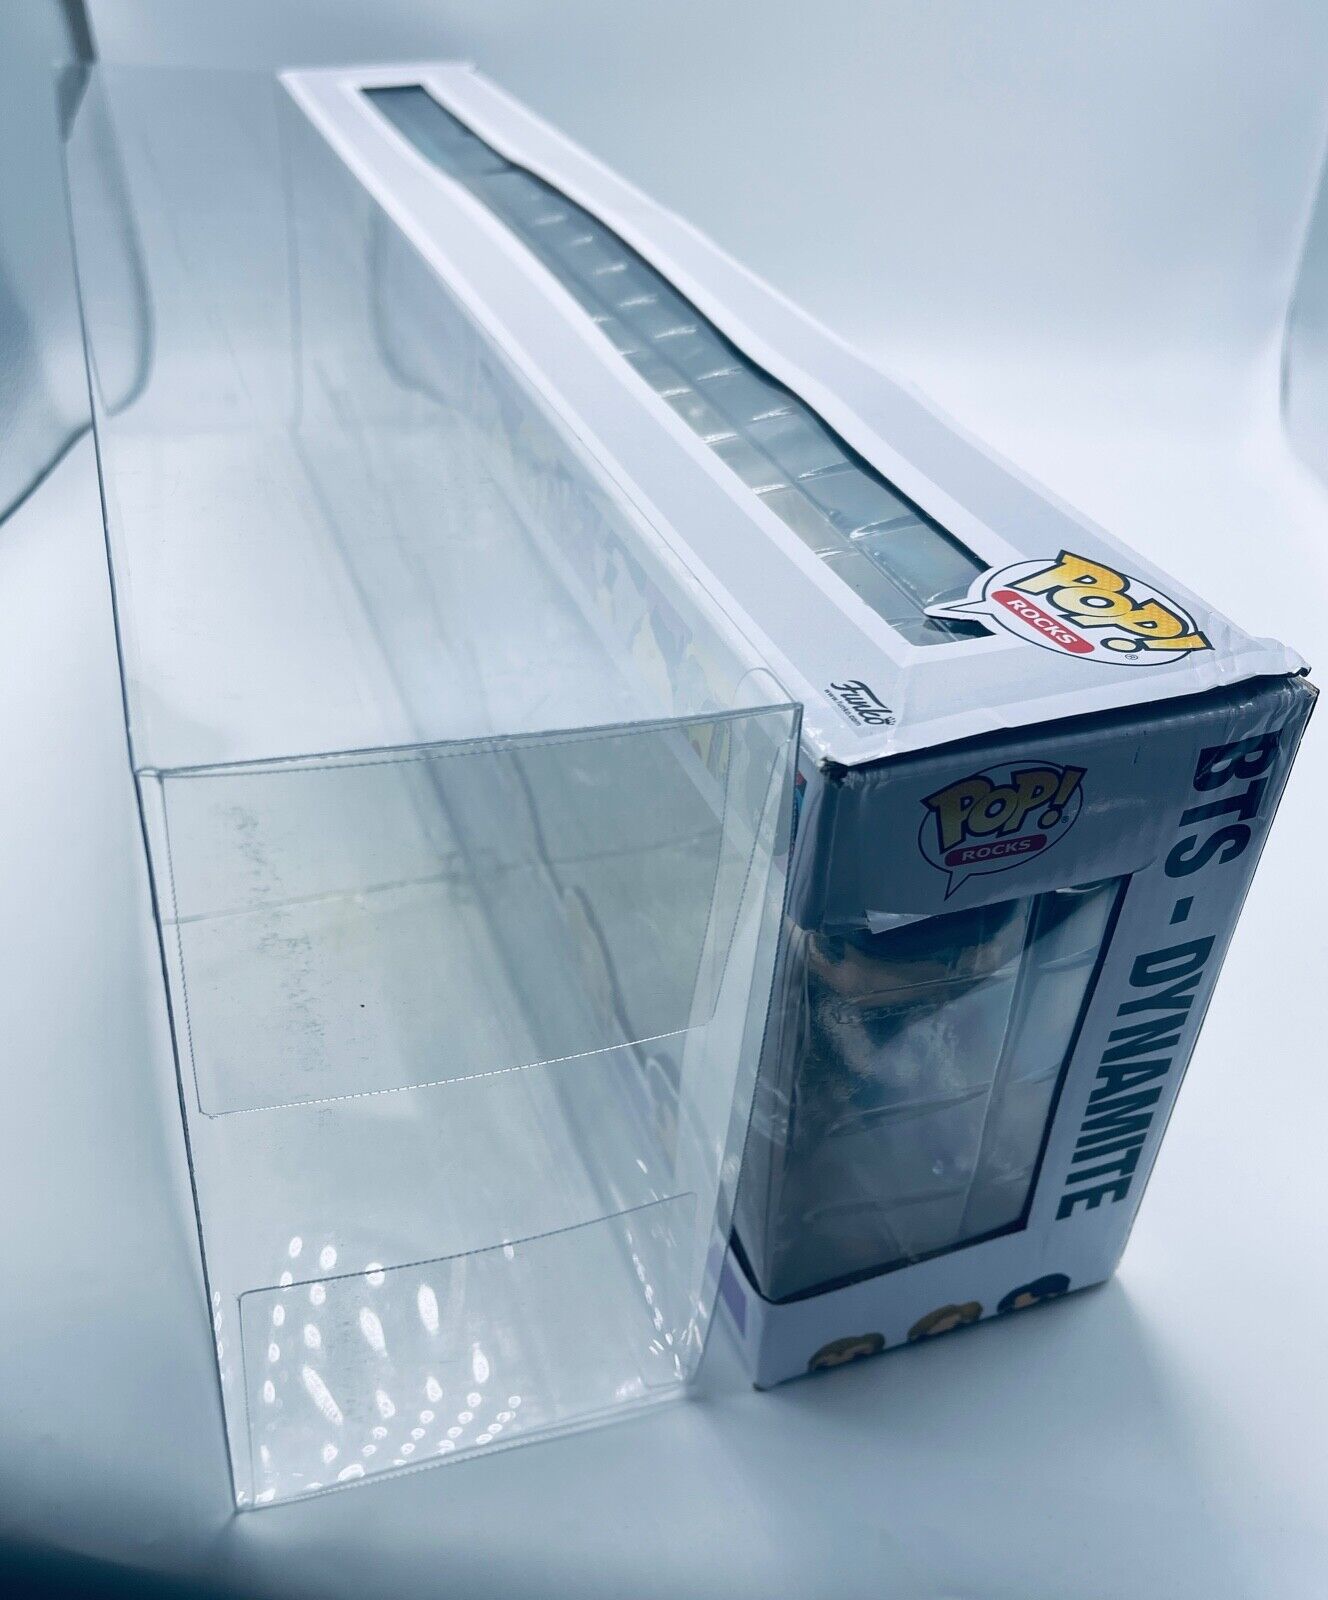 Funko POP&excl; Protector 0&period;50mm Plastic ONLY Fits the BTS 7 pack NO POPS INCLUDED&excl;